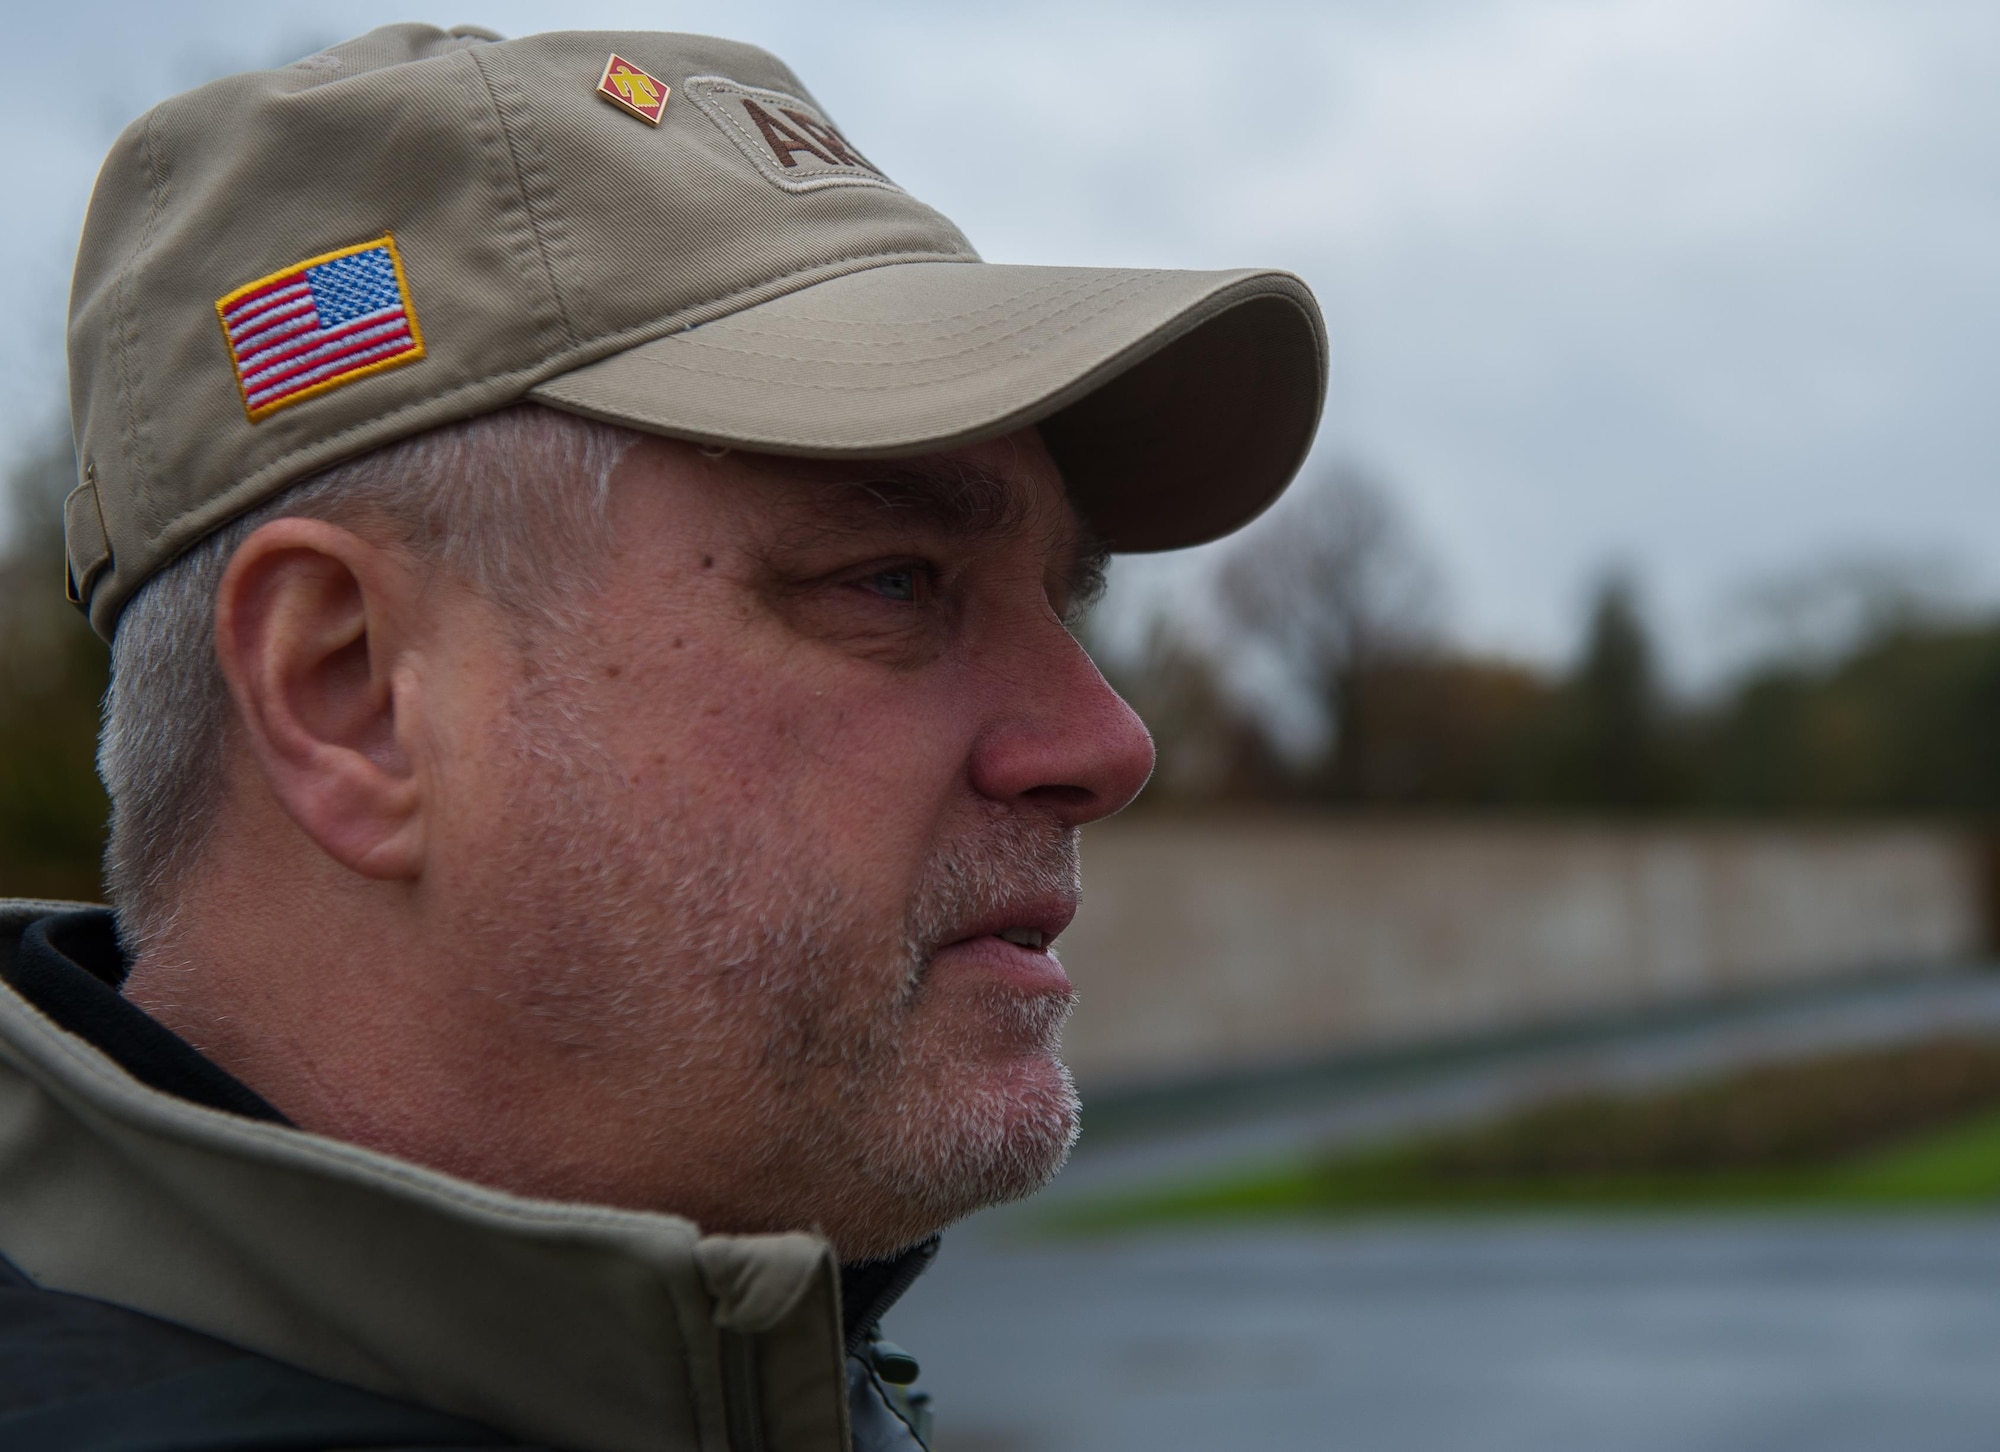 Sean, a U.S. Army veteran, becomes emotional, recalling memories of his friends who died in combat, at Lorraine American Cemetery Nov. 11, 2016, at St. Avold, France. Veteran’s Day is observed annually on November 11 and commemorates military veterans who currently serve or have served the U.S. armed forces, including those who gave the ultimate sacrifice. According to the DoD and Veterans Administration, since World War I, approximately 624,000 U.S. servicemembers have been killed in action battling in wars and conflicts. The Lorraine American Cemetery contains the buried remains of over 10,000 of them. It is the largest burial site of U.S. servicemembers in Europe. (U.S. Air Force photo by Airman 1st Class Lane T. Plummer)